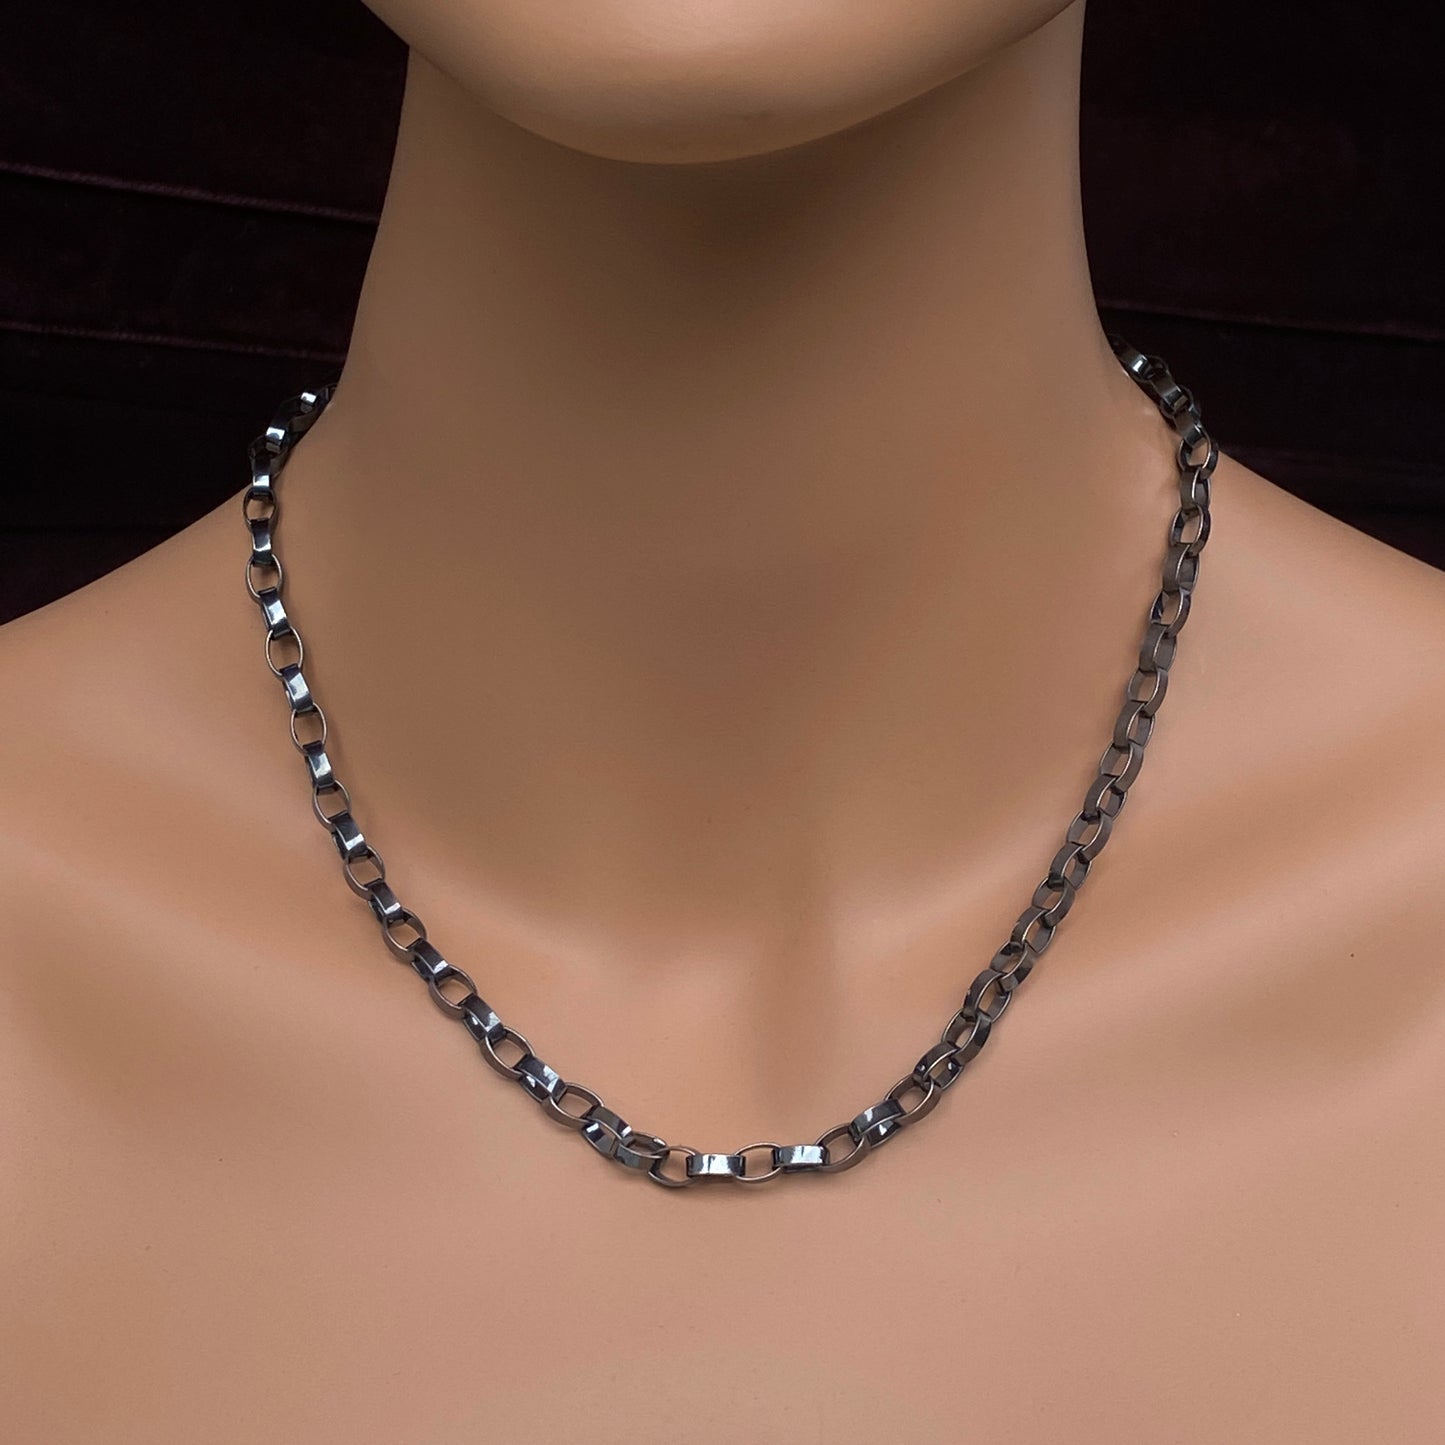 Oxidized Sterling Silver Heavy Chain